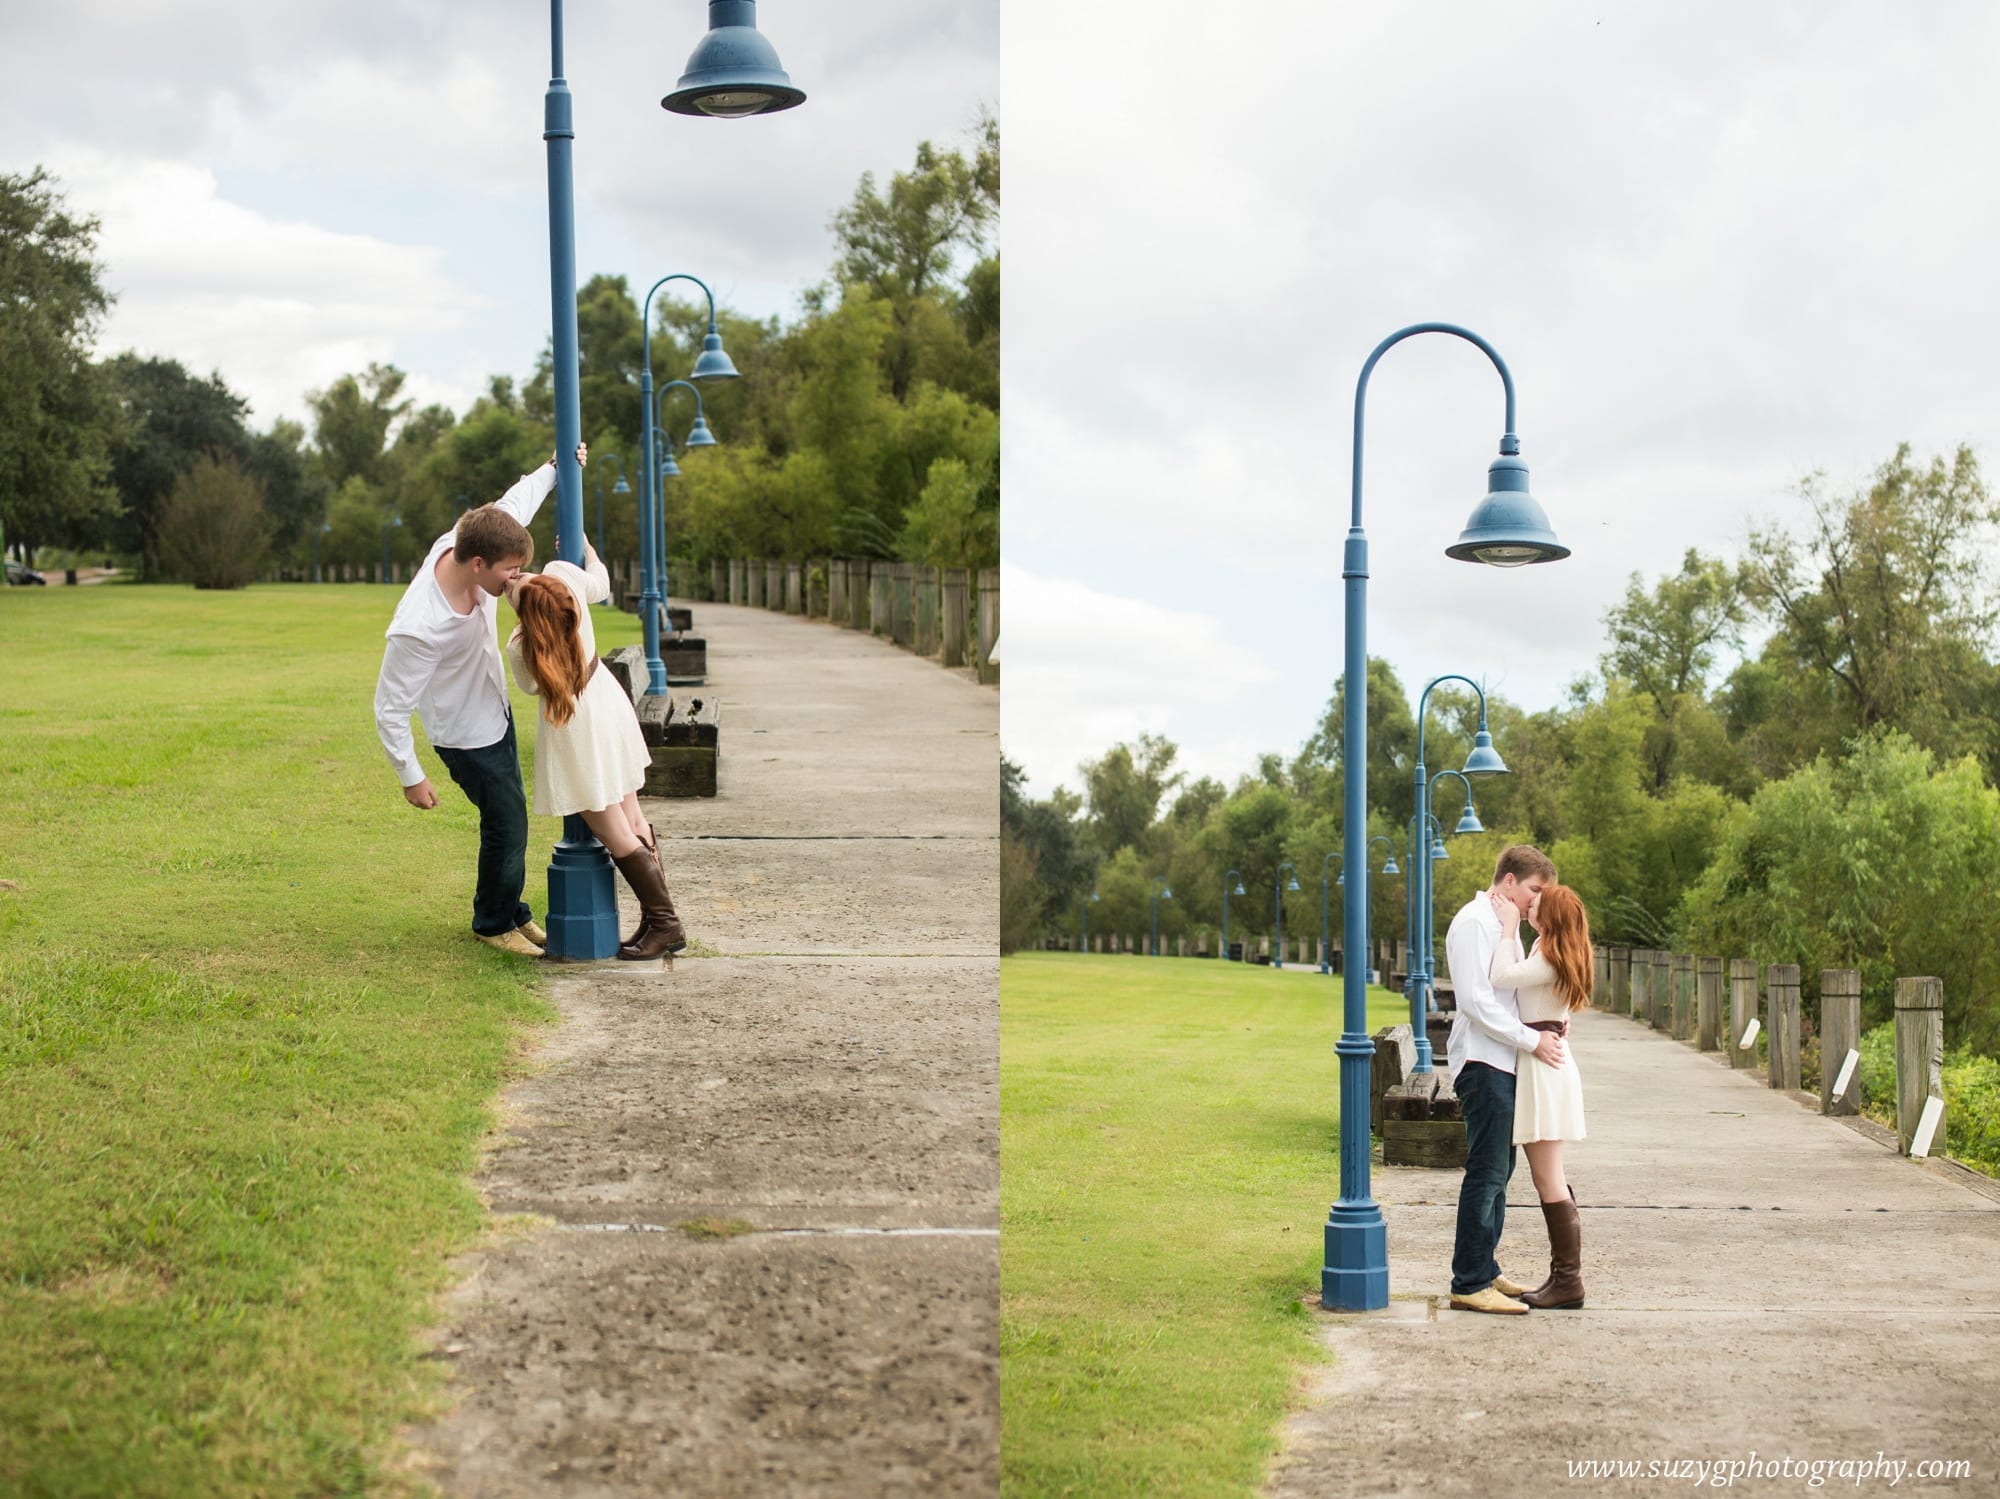 engagements-new orleans-texas-baton rouge-lake charles-suzy g-photography-suzygphotography_0141